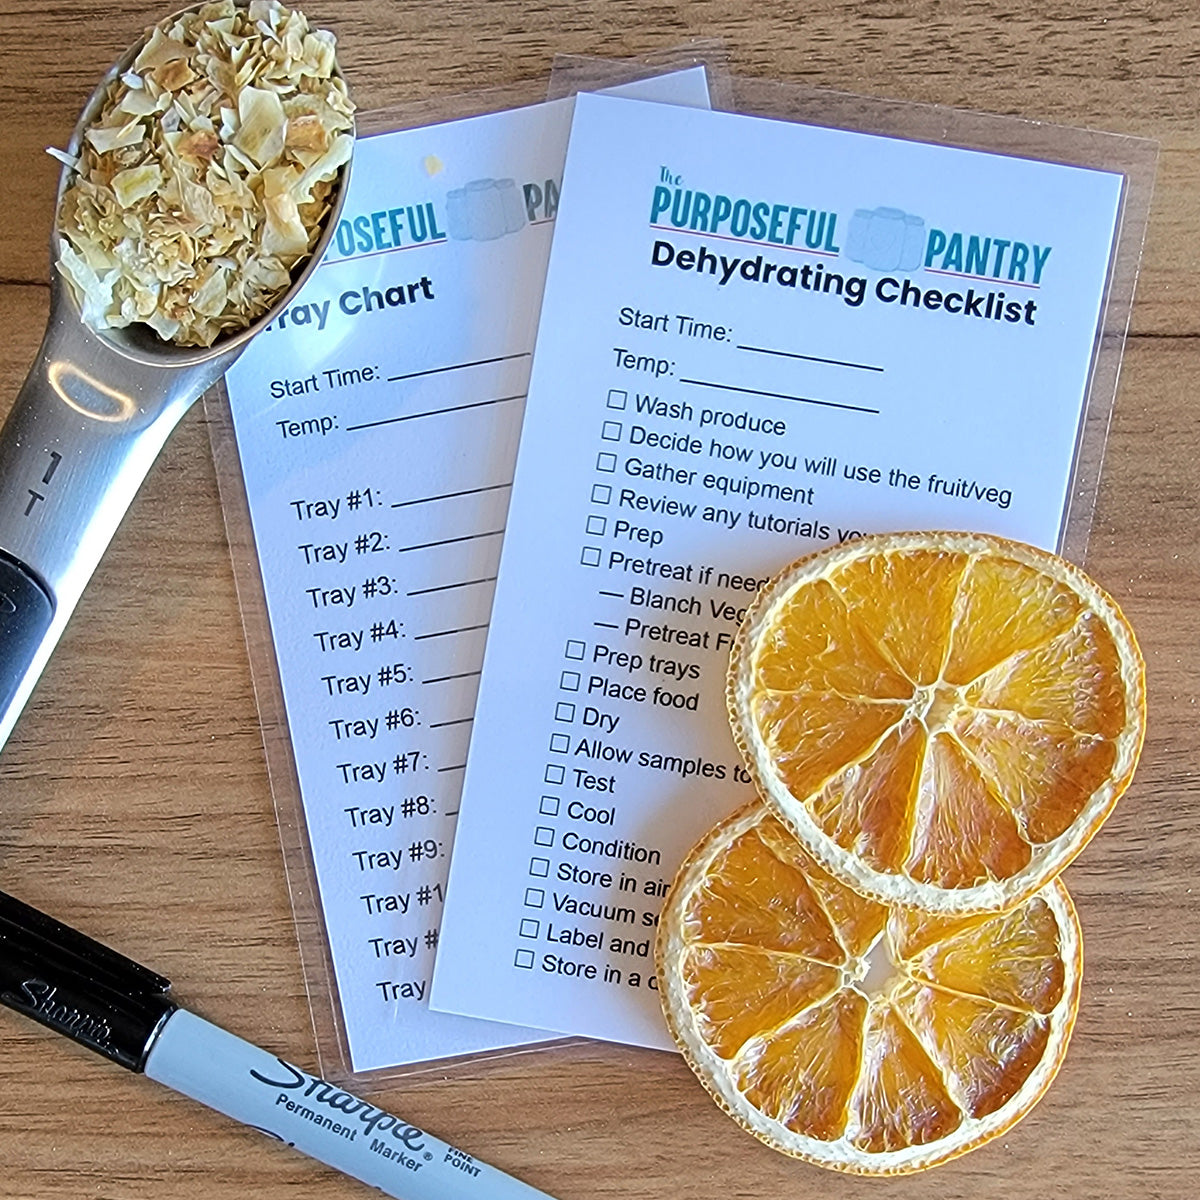 A table with orange slices, a spoon, and a Dehydrating Checklist - Laminated from The Purposeful Pantry.